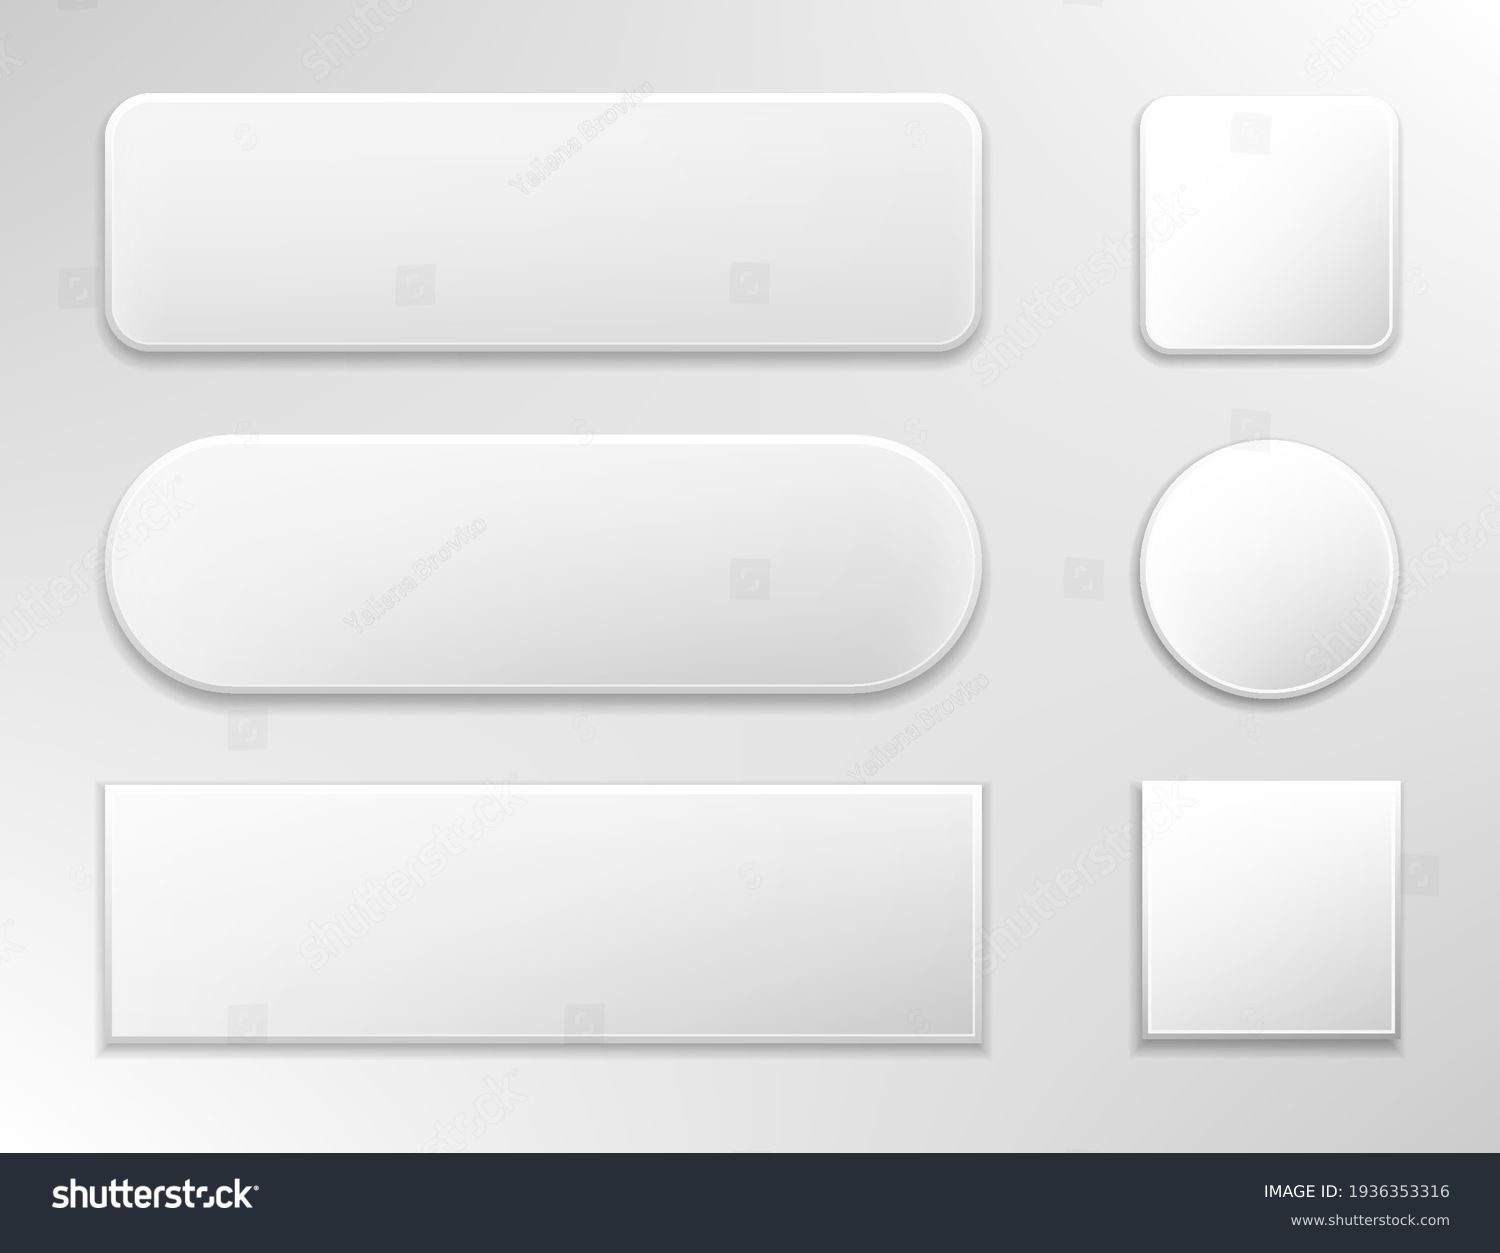 Set of various gray glossy web buttons.Vector illustration isolated on white background.Eps 10. #1936353316